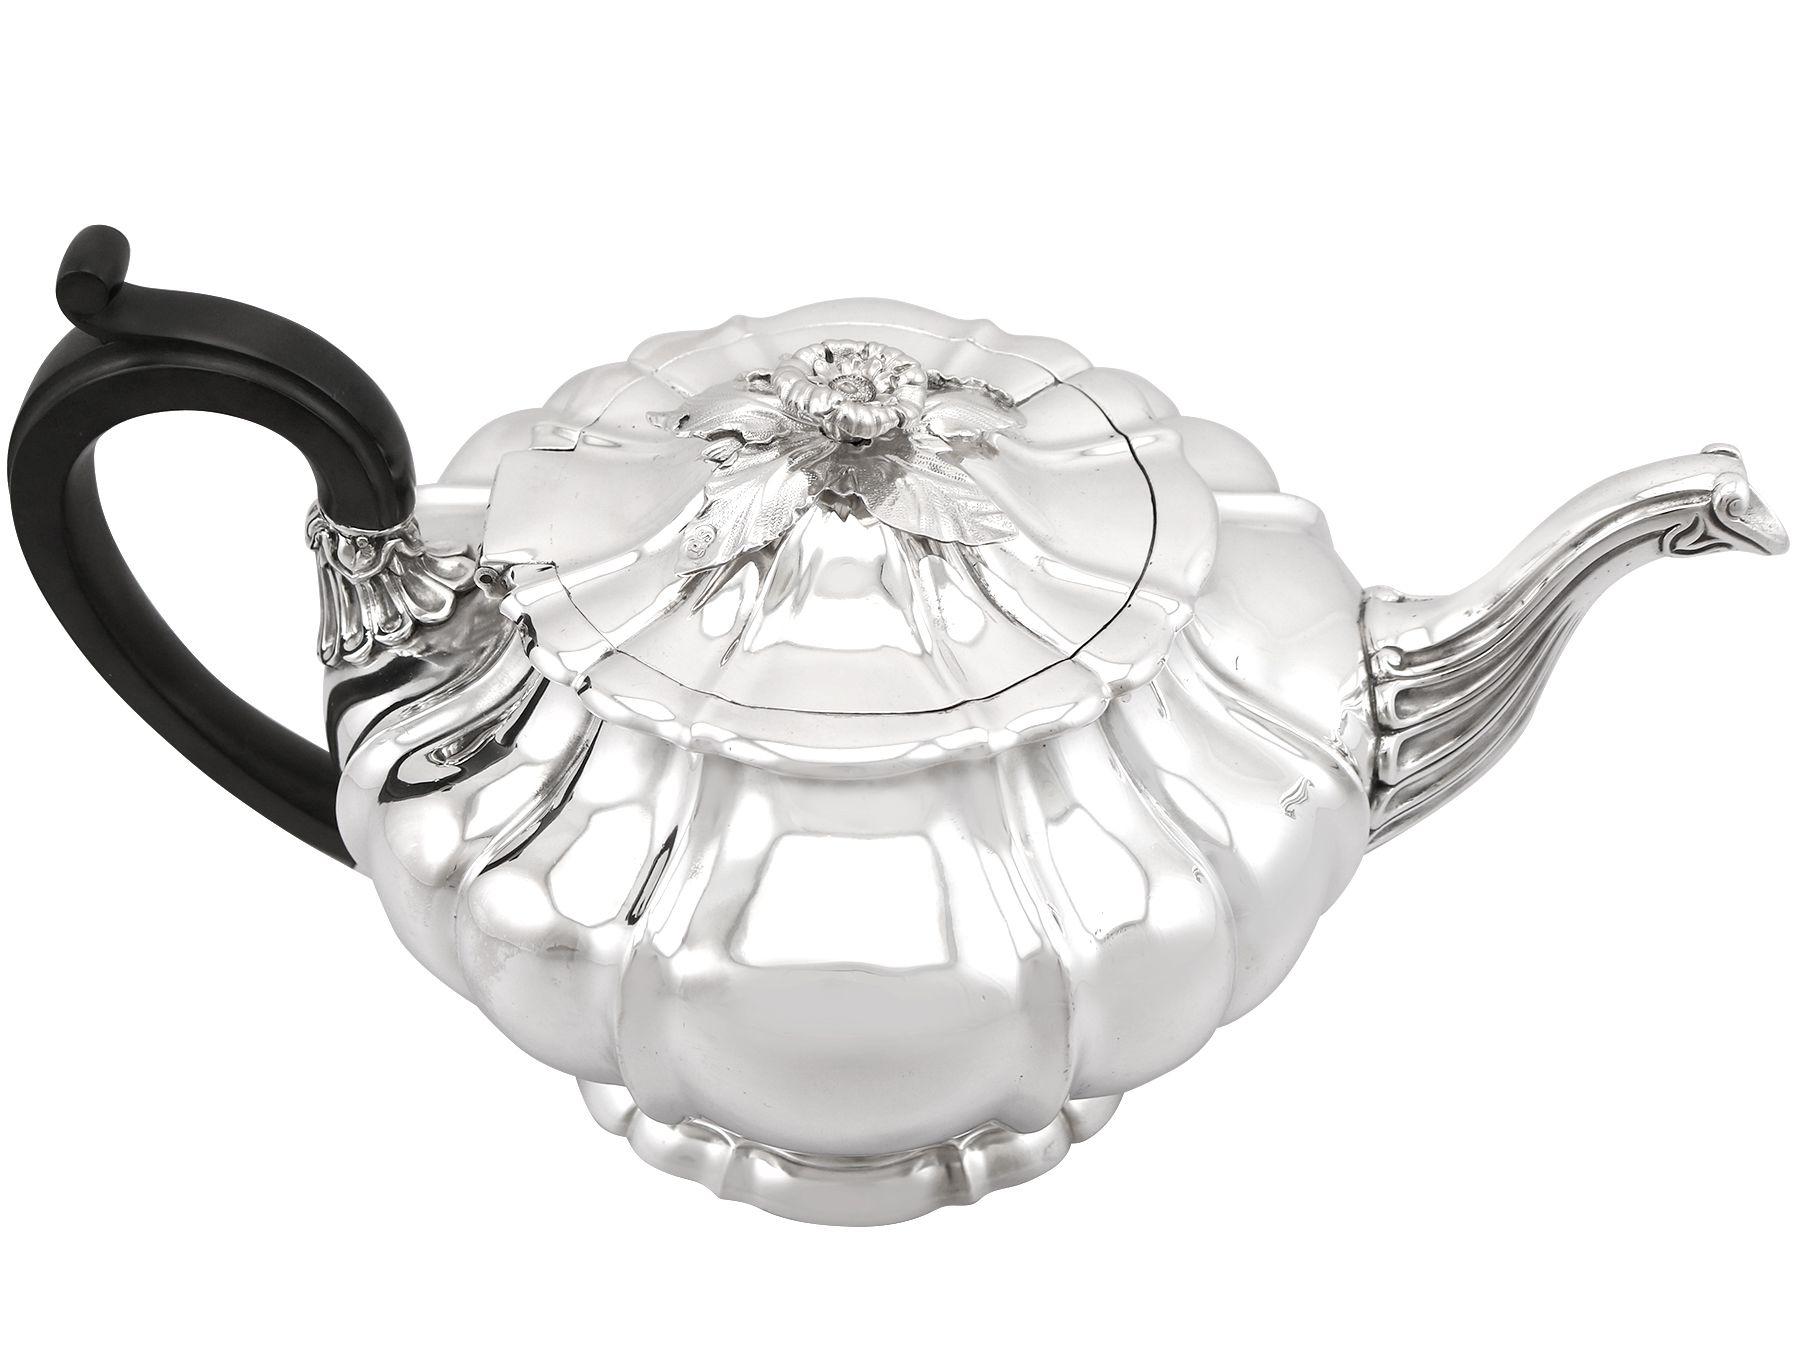 An exceptional, fine and impressive antique George IV English sterling silver teapot made by Paul Storr; an addition to our antique silver teaware collection.

This exceptional antique George IV sterling silver teapot has a circular pumpkin shaped